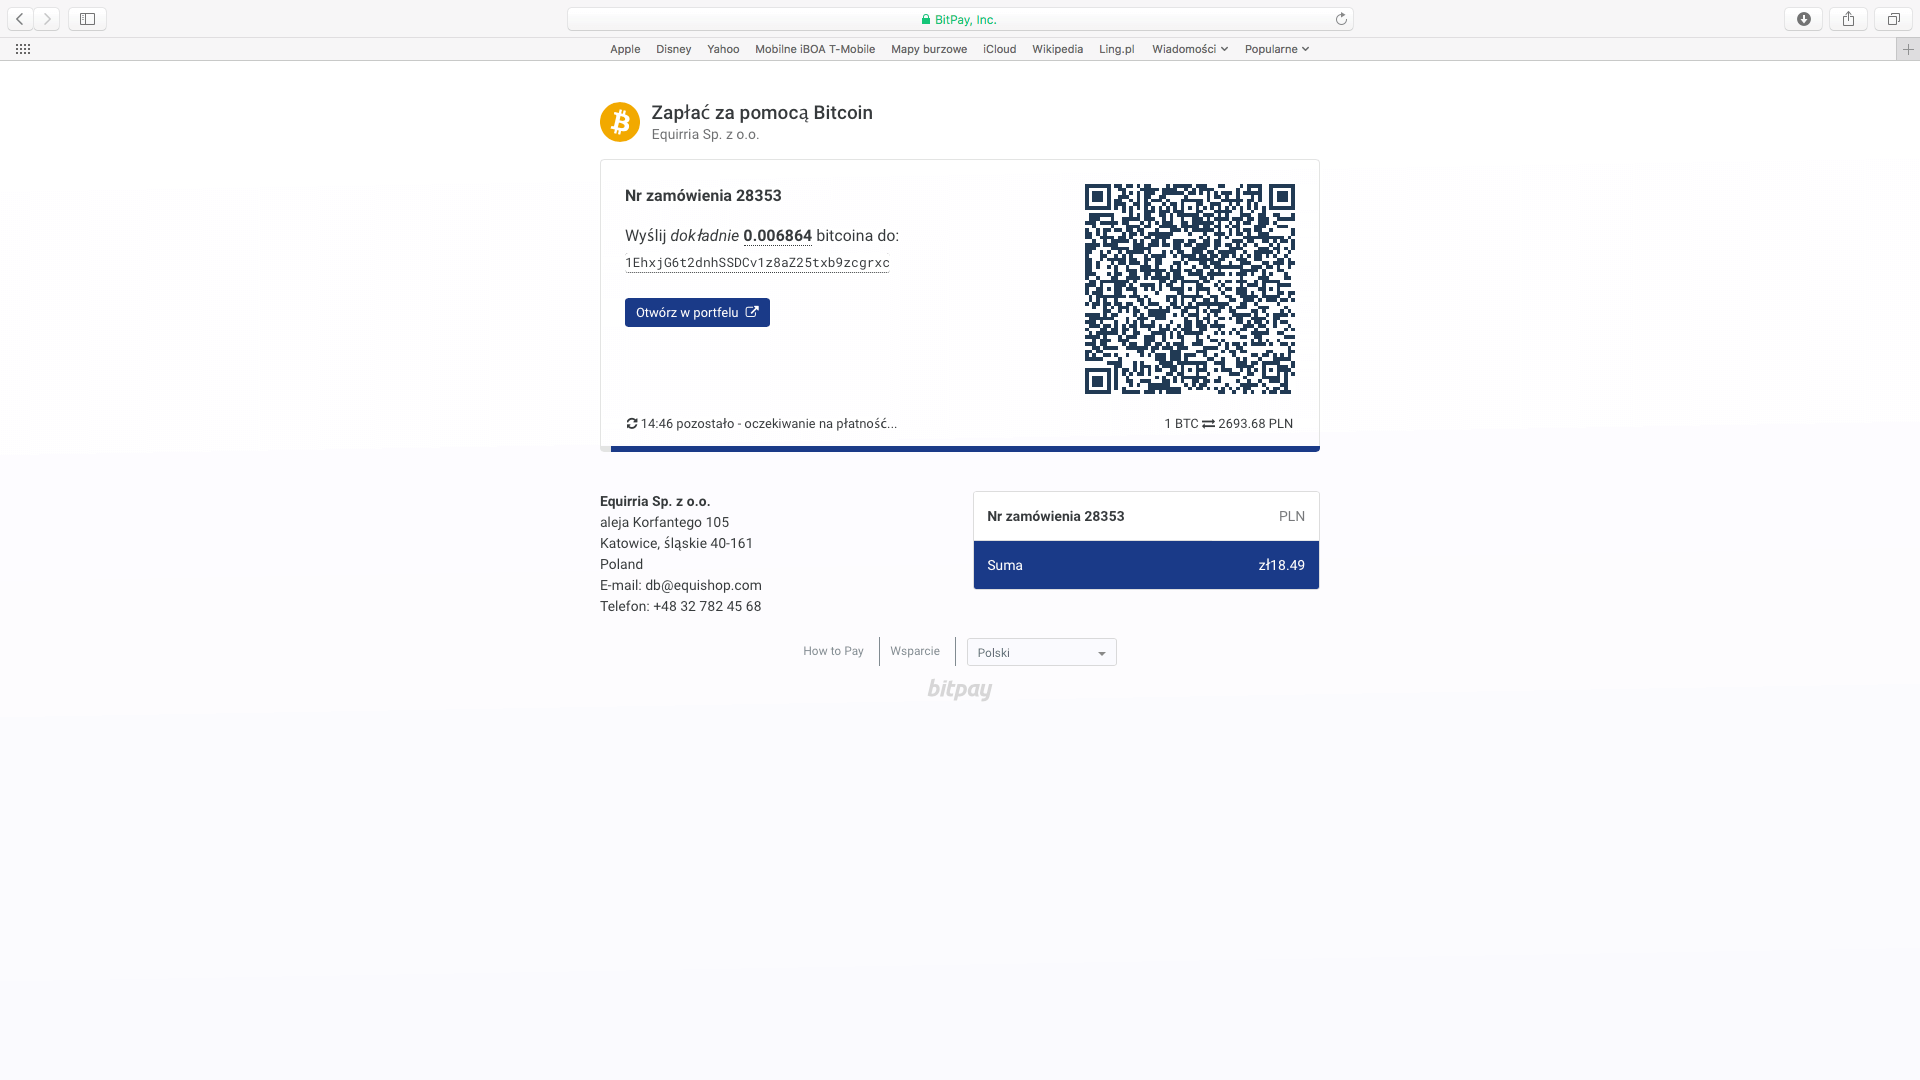 BitPay landing page to pay with Bitcoin